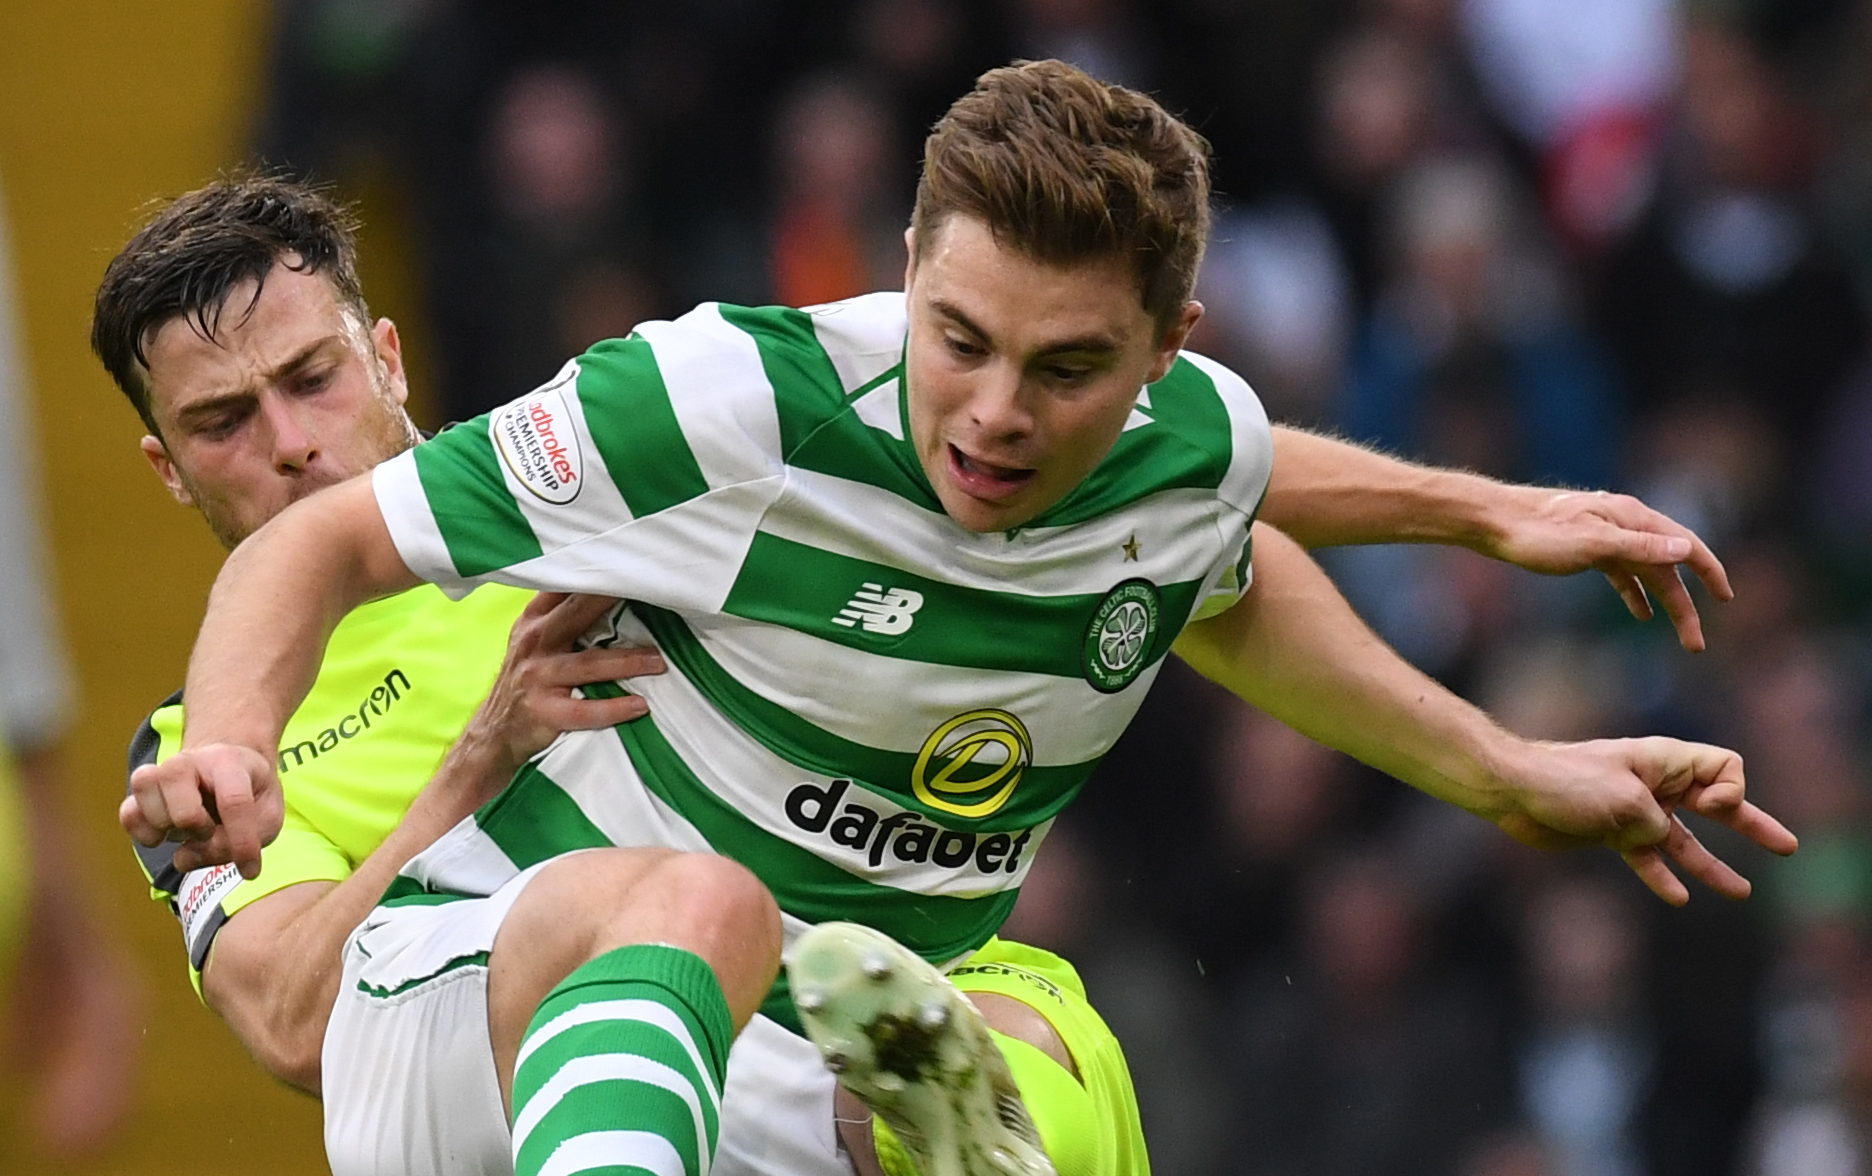 Celtic's James Forrest (right) is keen to be back in the action (SNS Group)